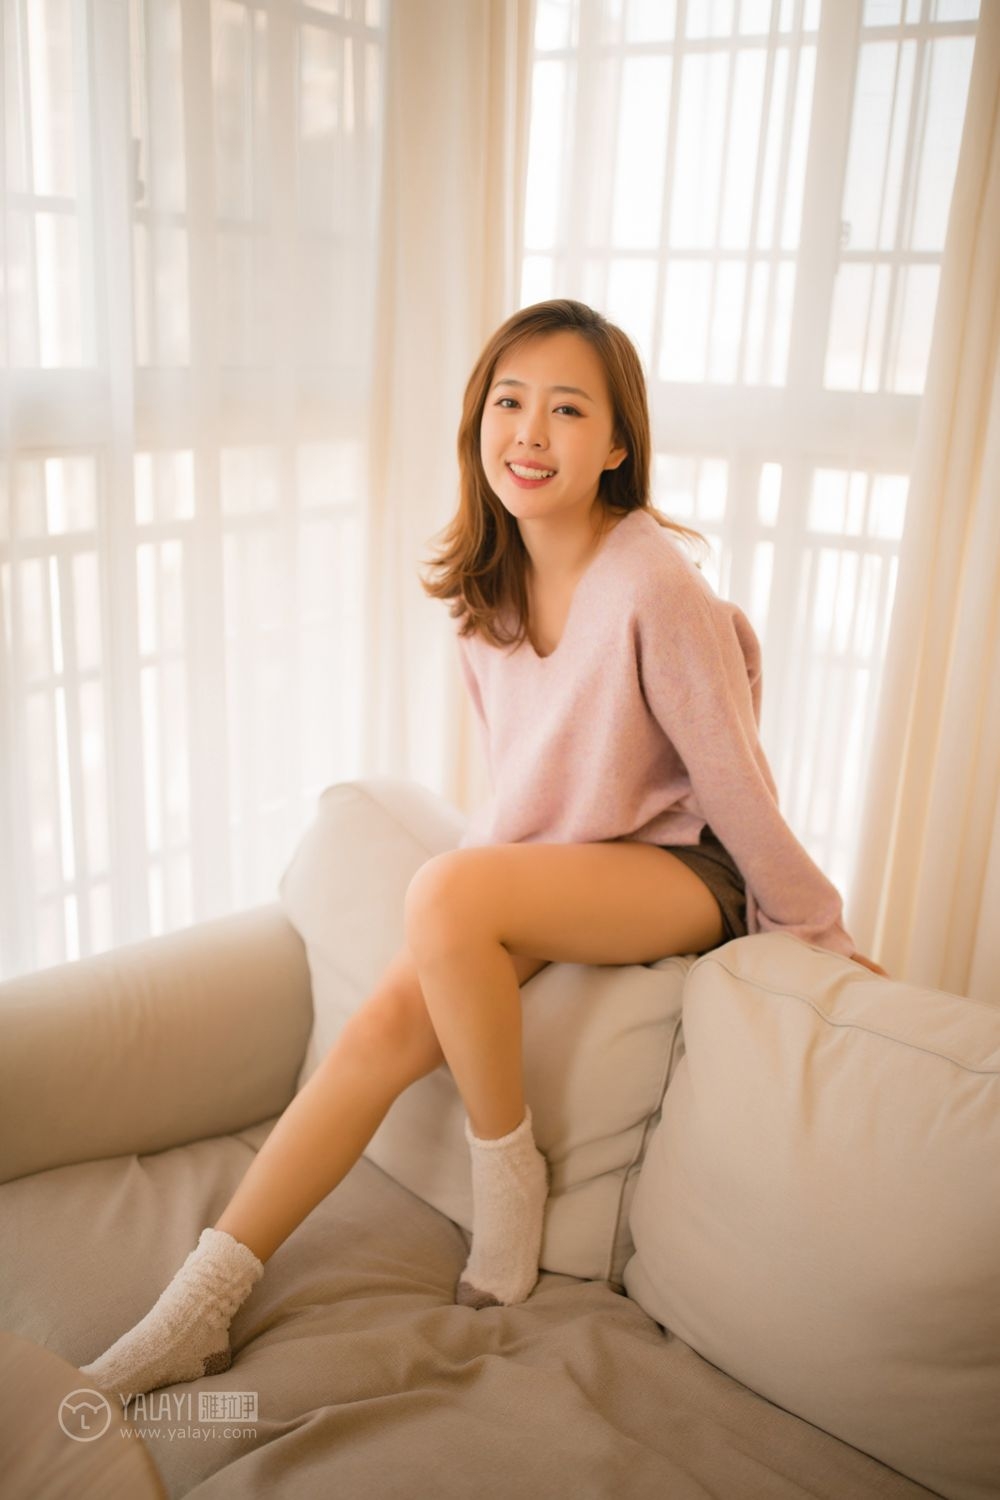 Young girl 26 years old beautiful tenant smiling sexy legs dynamic private portrait(14)